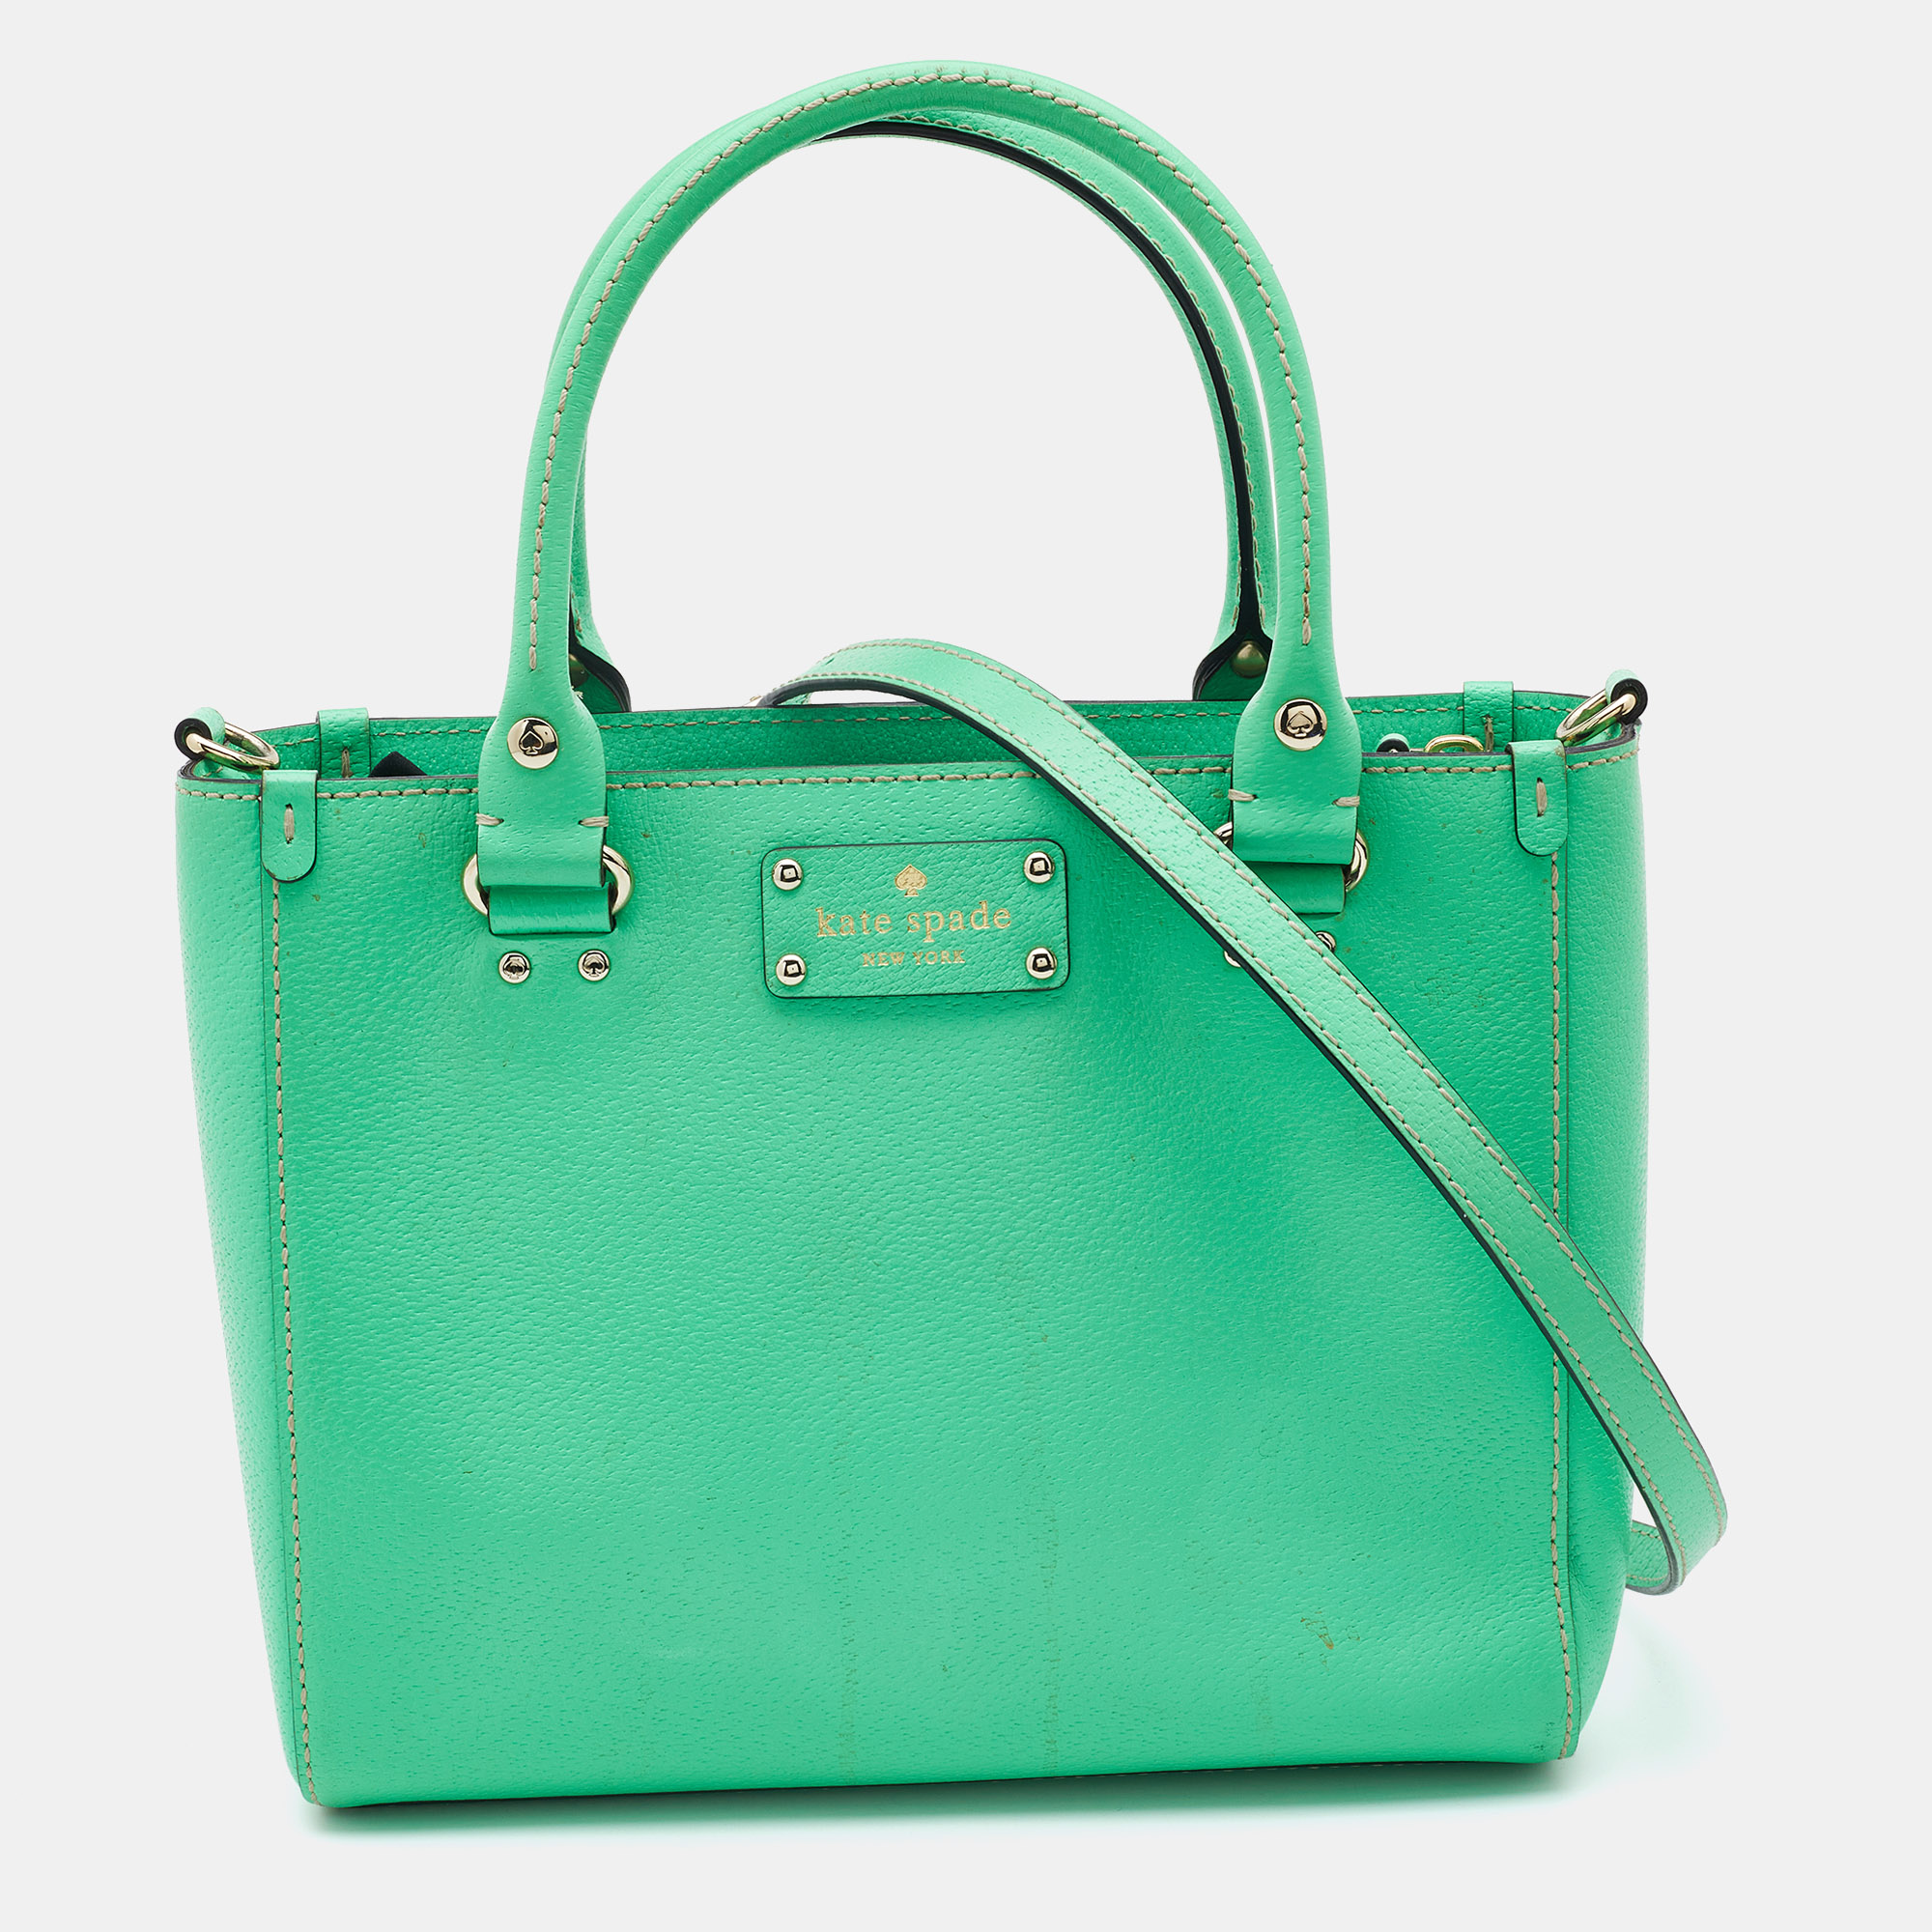 Pre-owned Kate Spade Green Leather Wellesley Quinn Tote